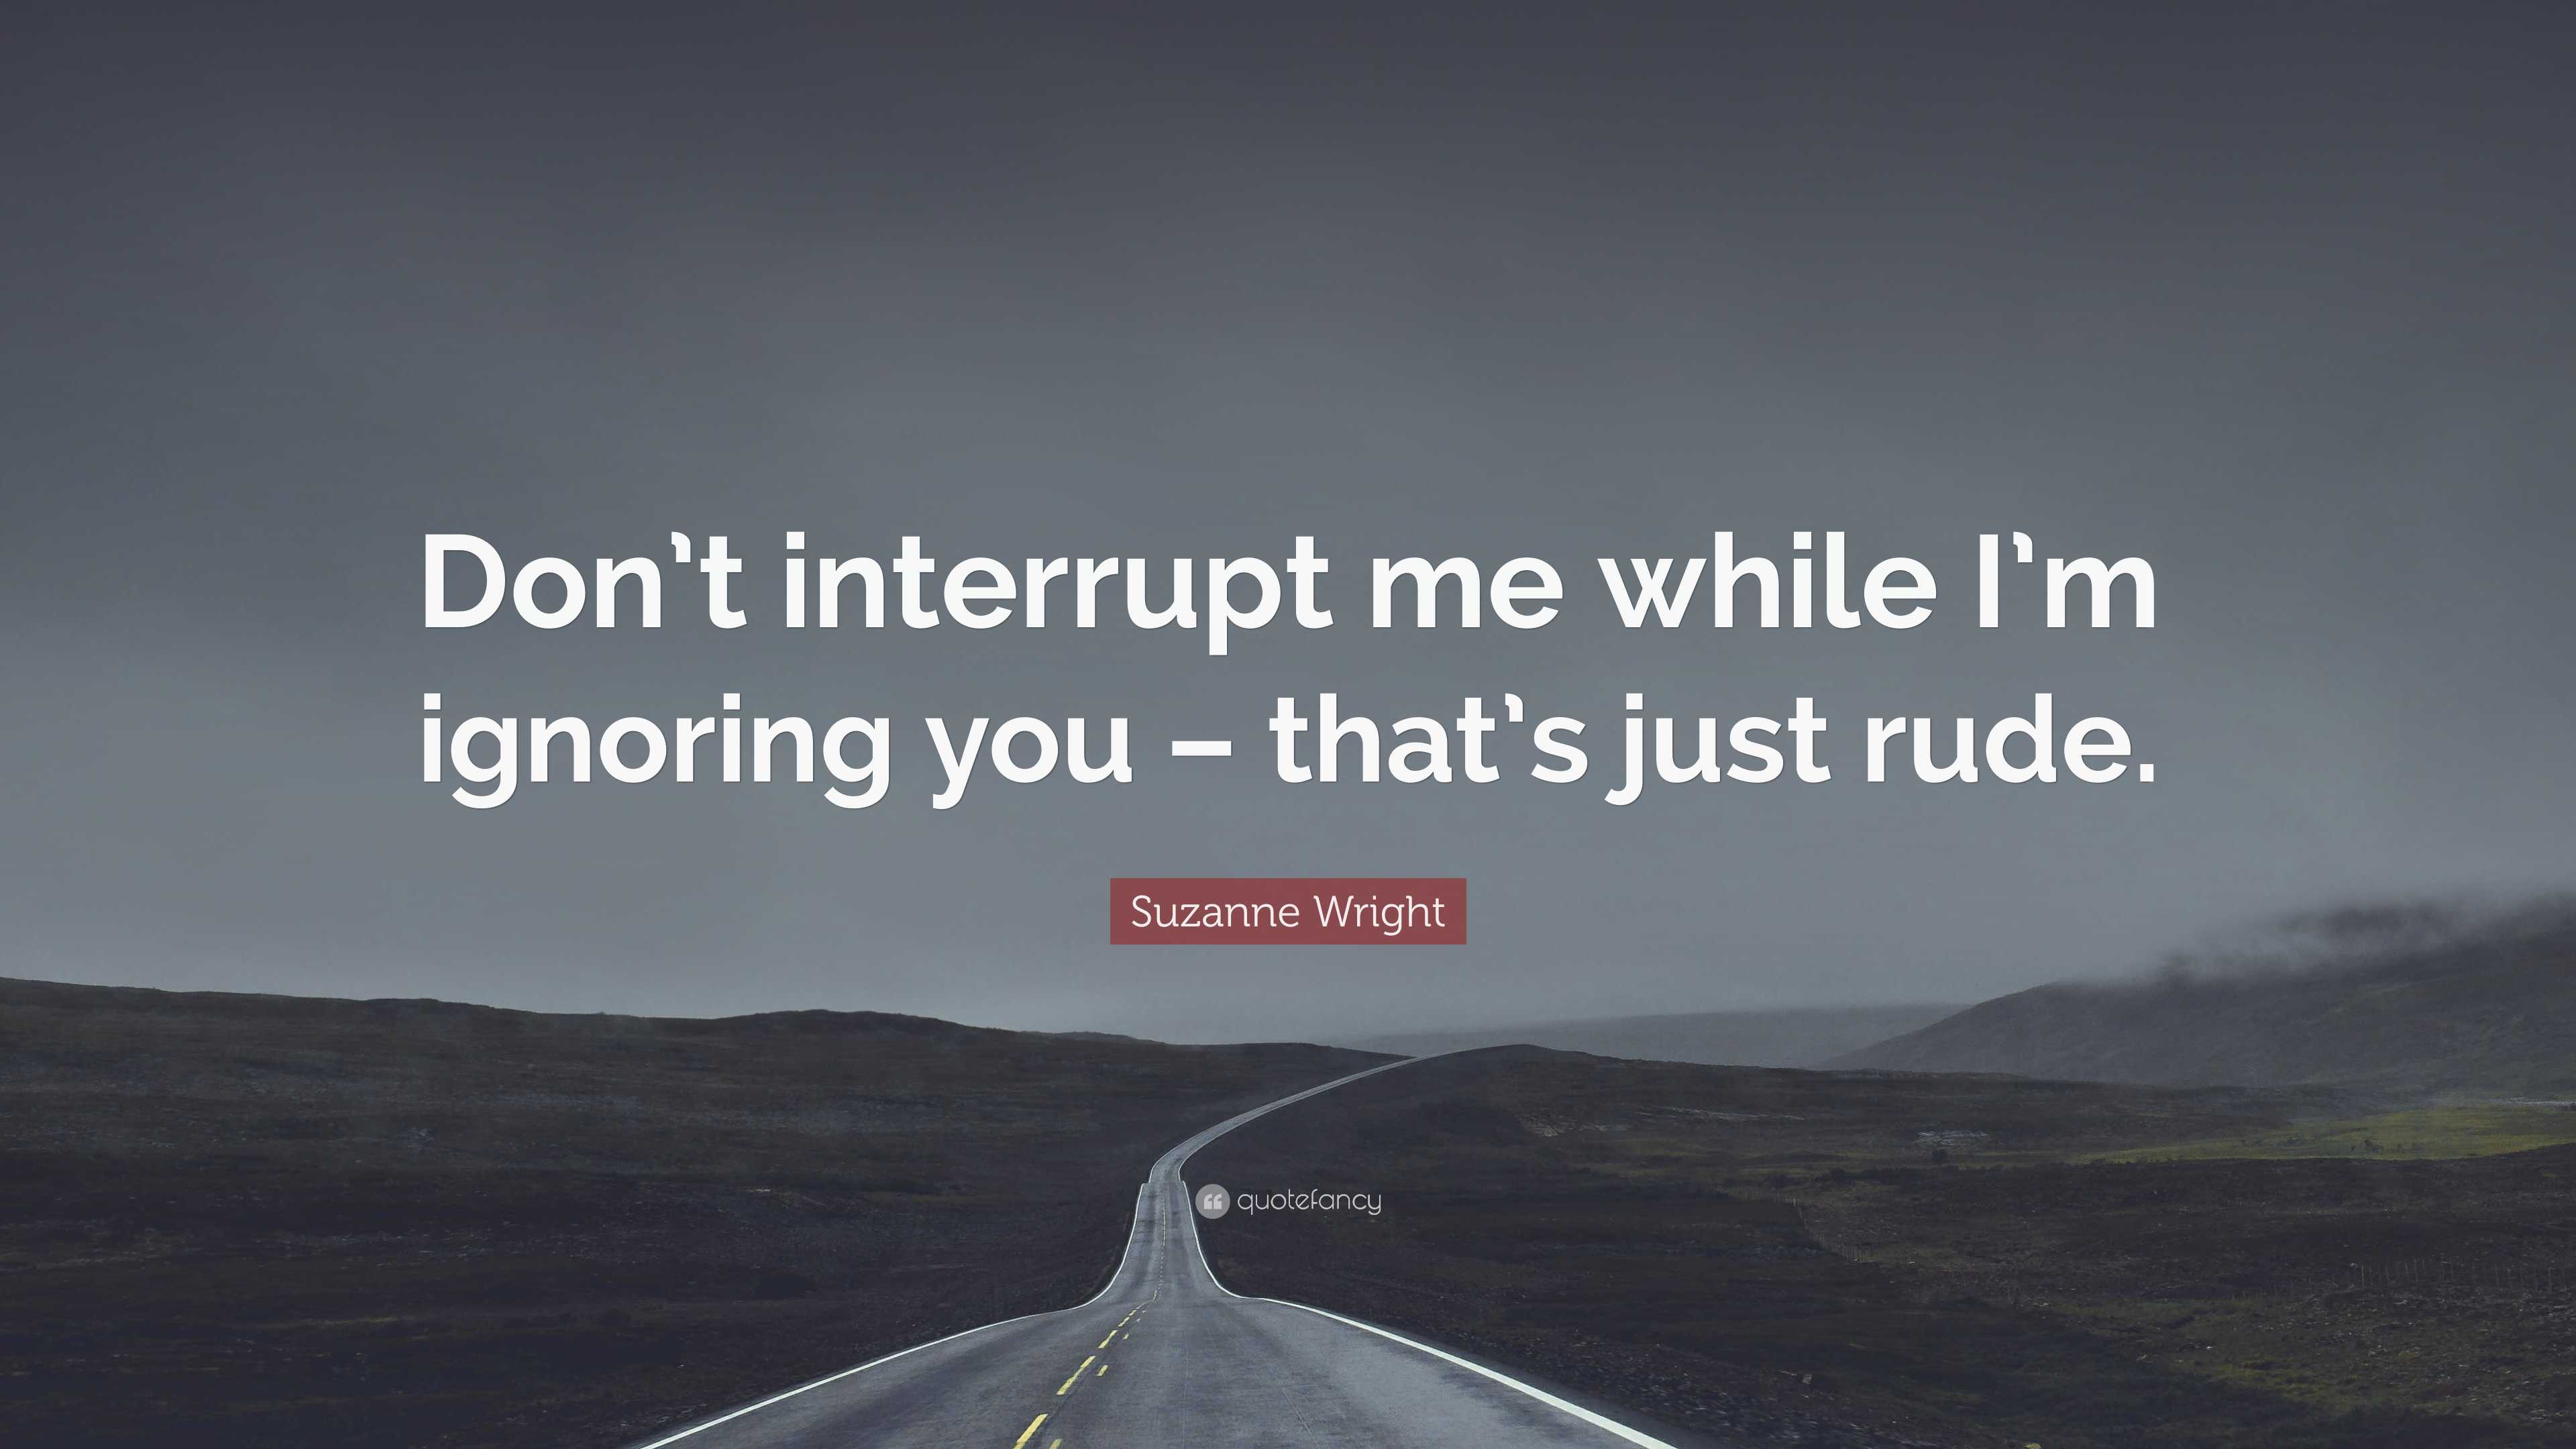 Suzanne Wright Quote: “You tempt me to break my own rules, and